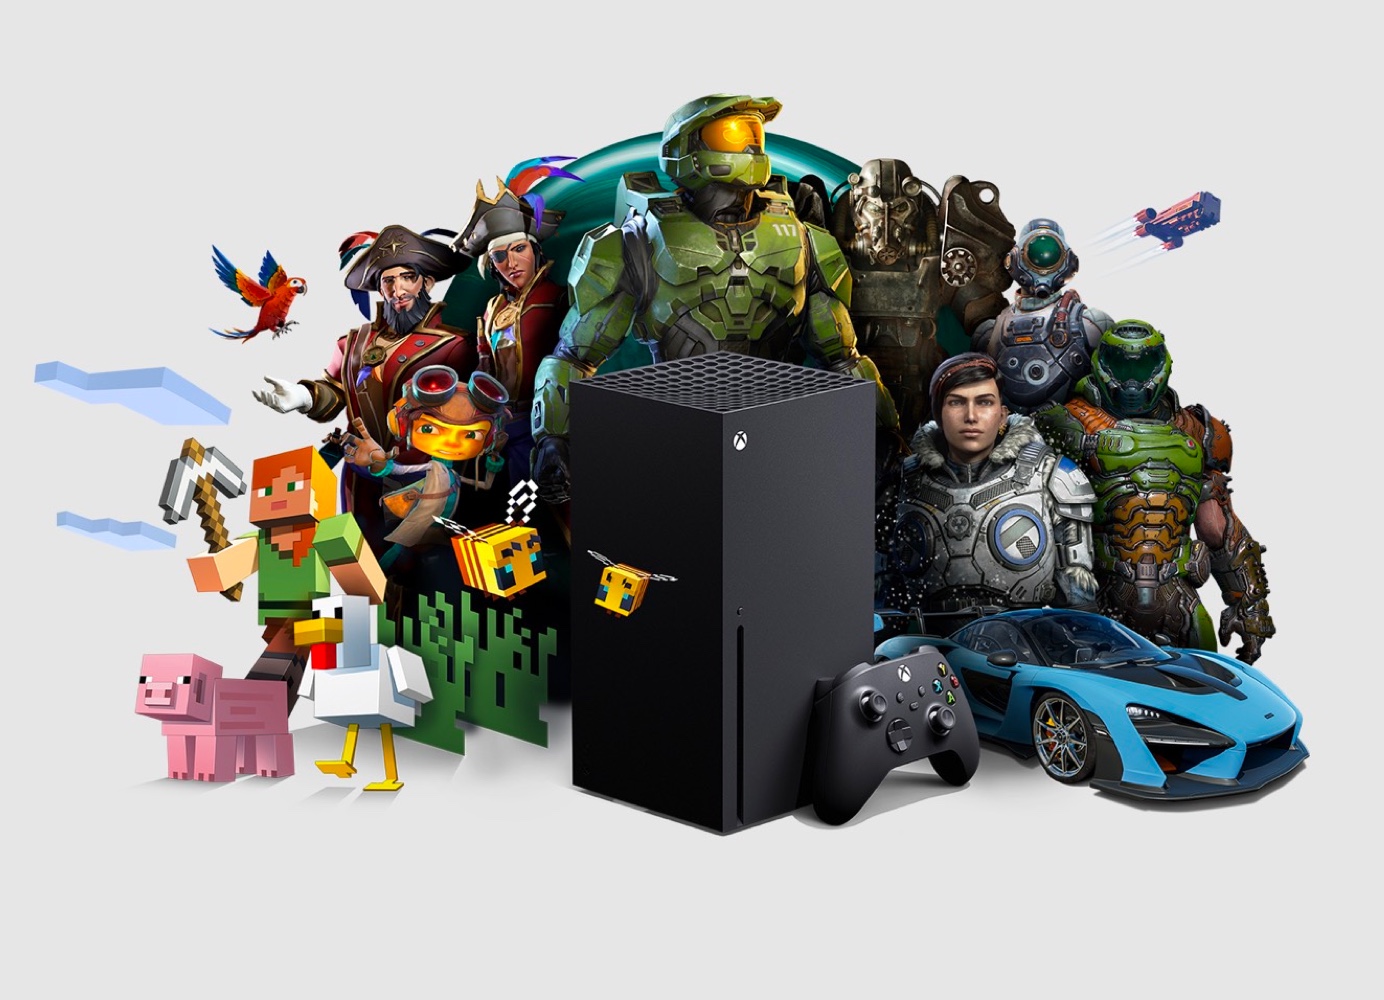 Purchase the Xbox Series X with over 100 games for Xmas